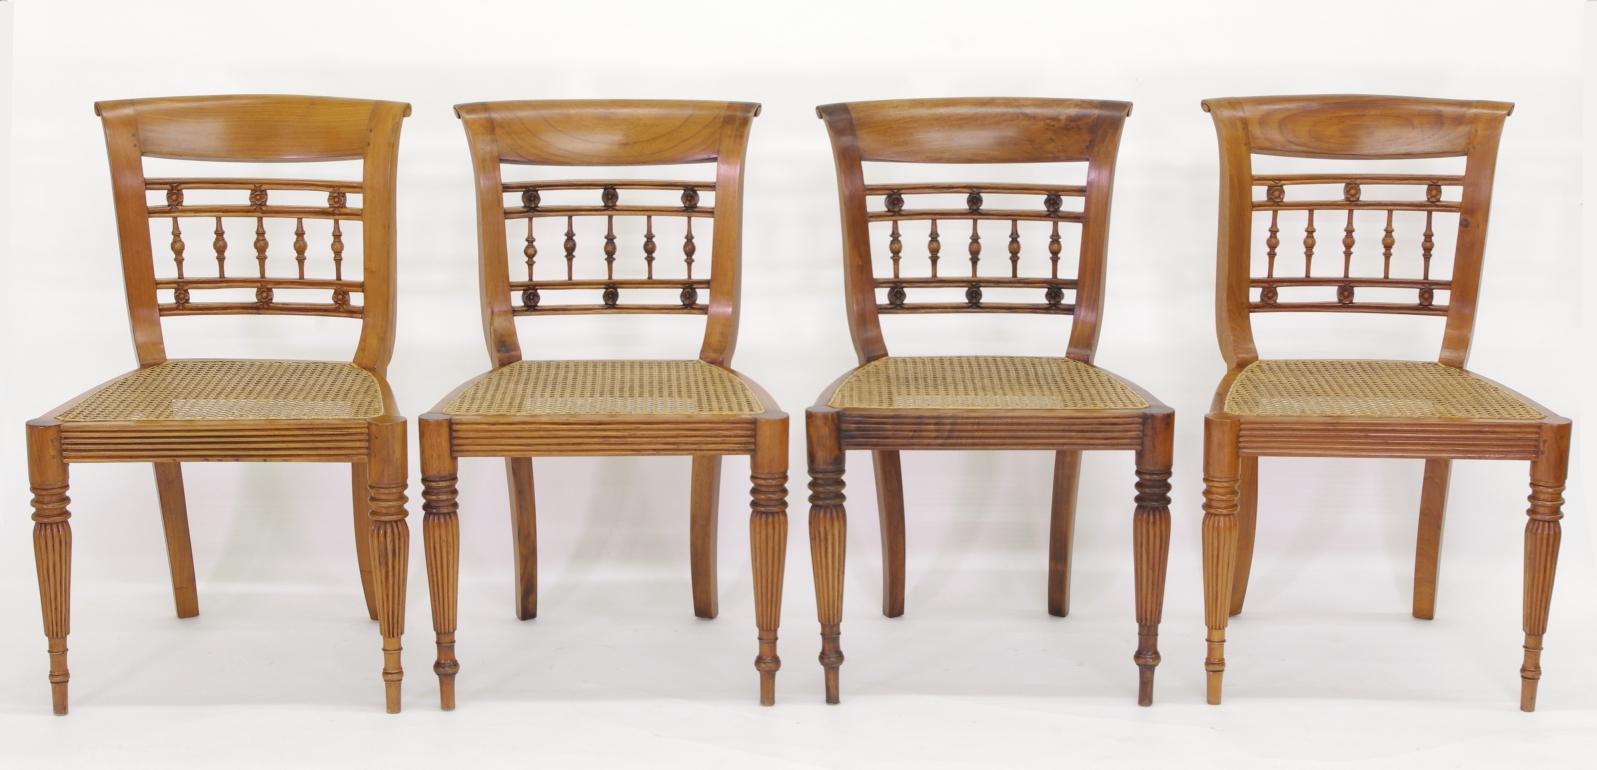 Set of six British colonial dining chairs, comprising two armchairs and four sides, each with a tablet crest over the rosette and spindle back; the caned seat framed by reeded rails and raised on turned and reeded legs.

The distinctive 'loop